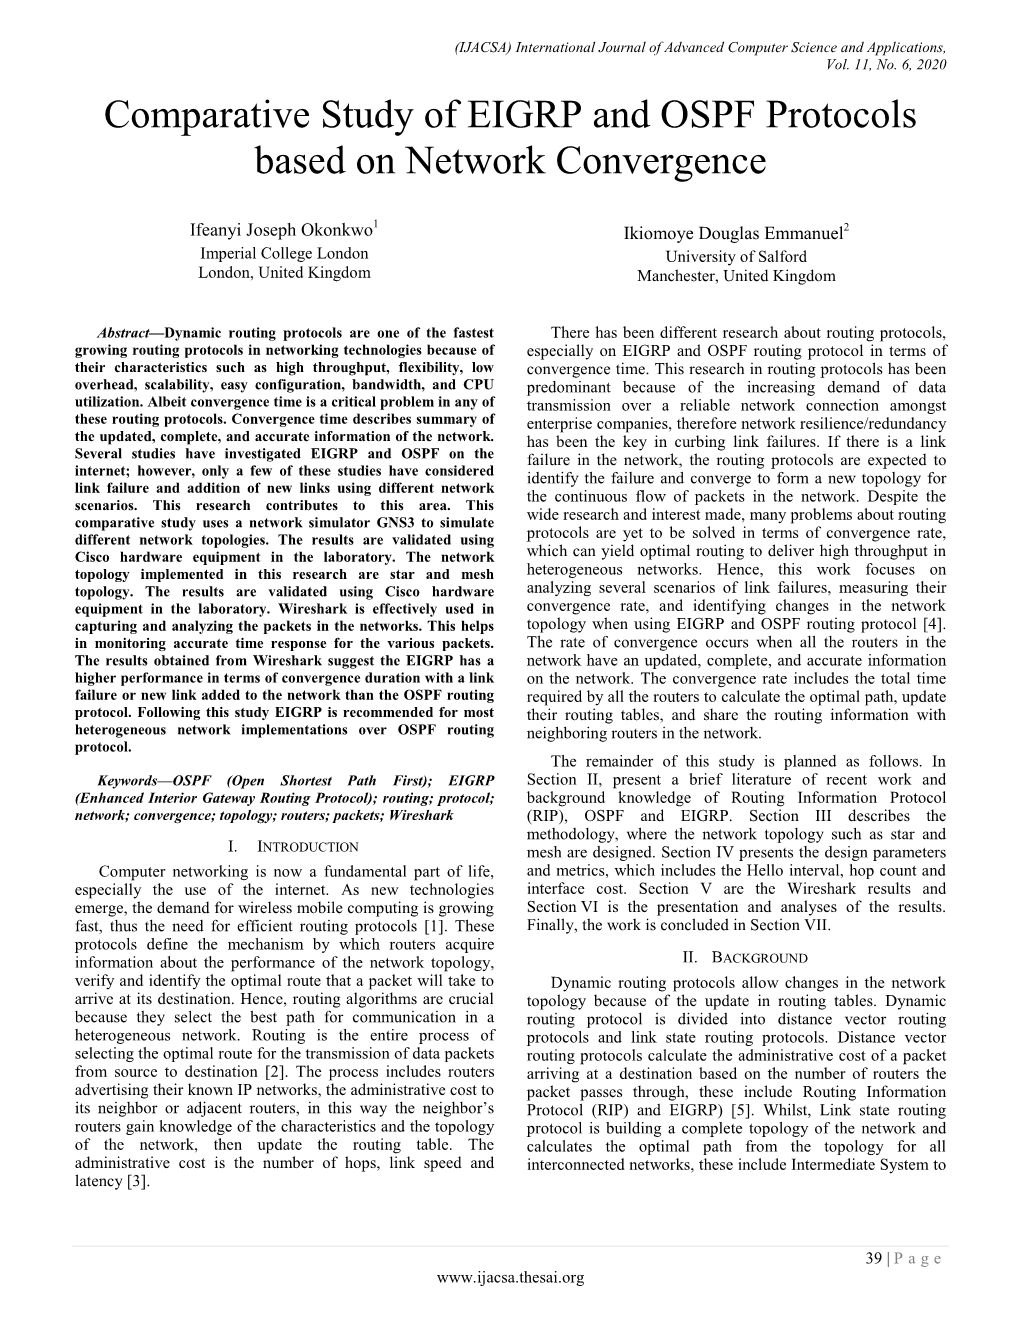 Comparative Study of EIGRP and OSPF Protocols Based on Network Convergence